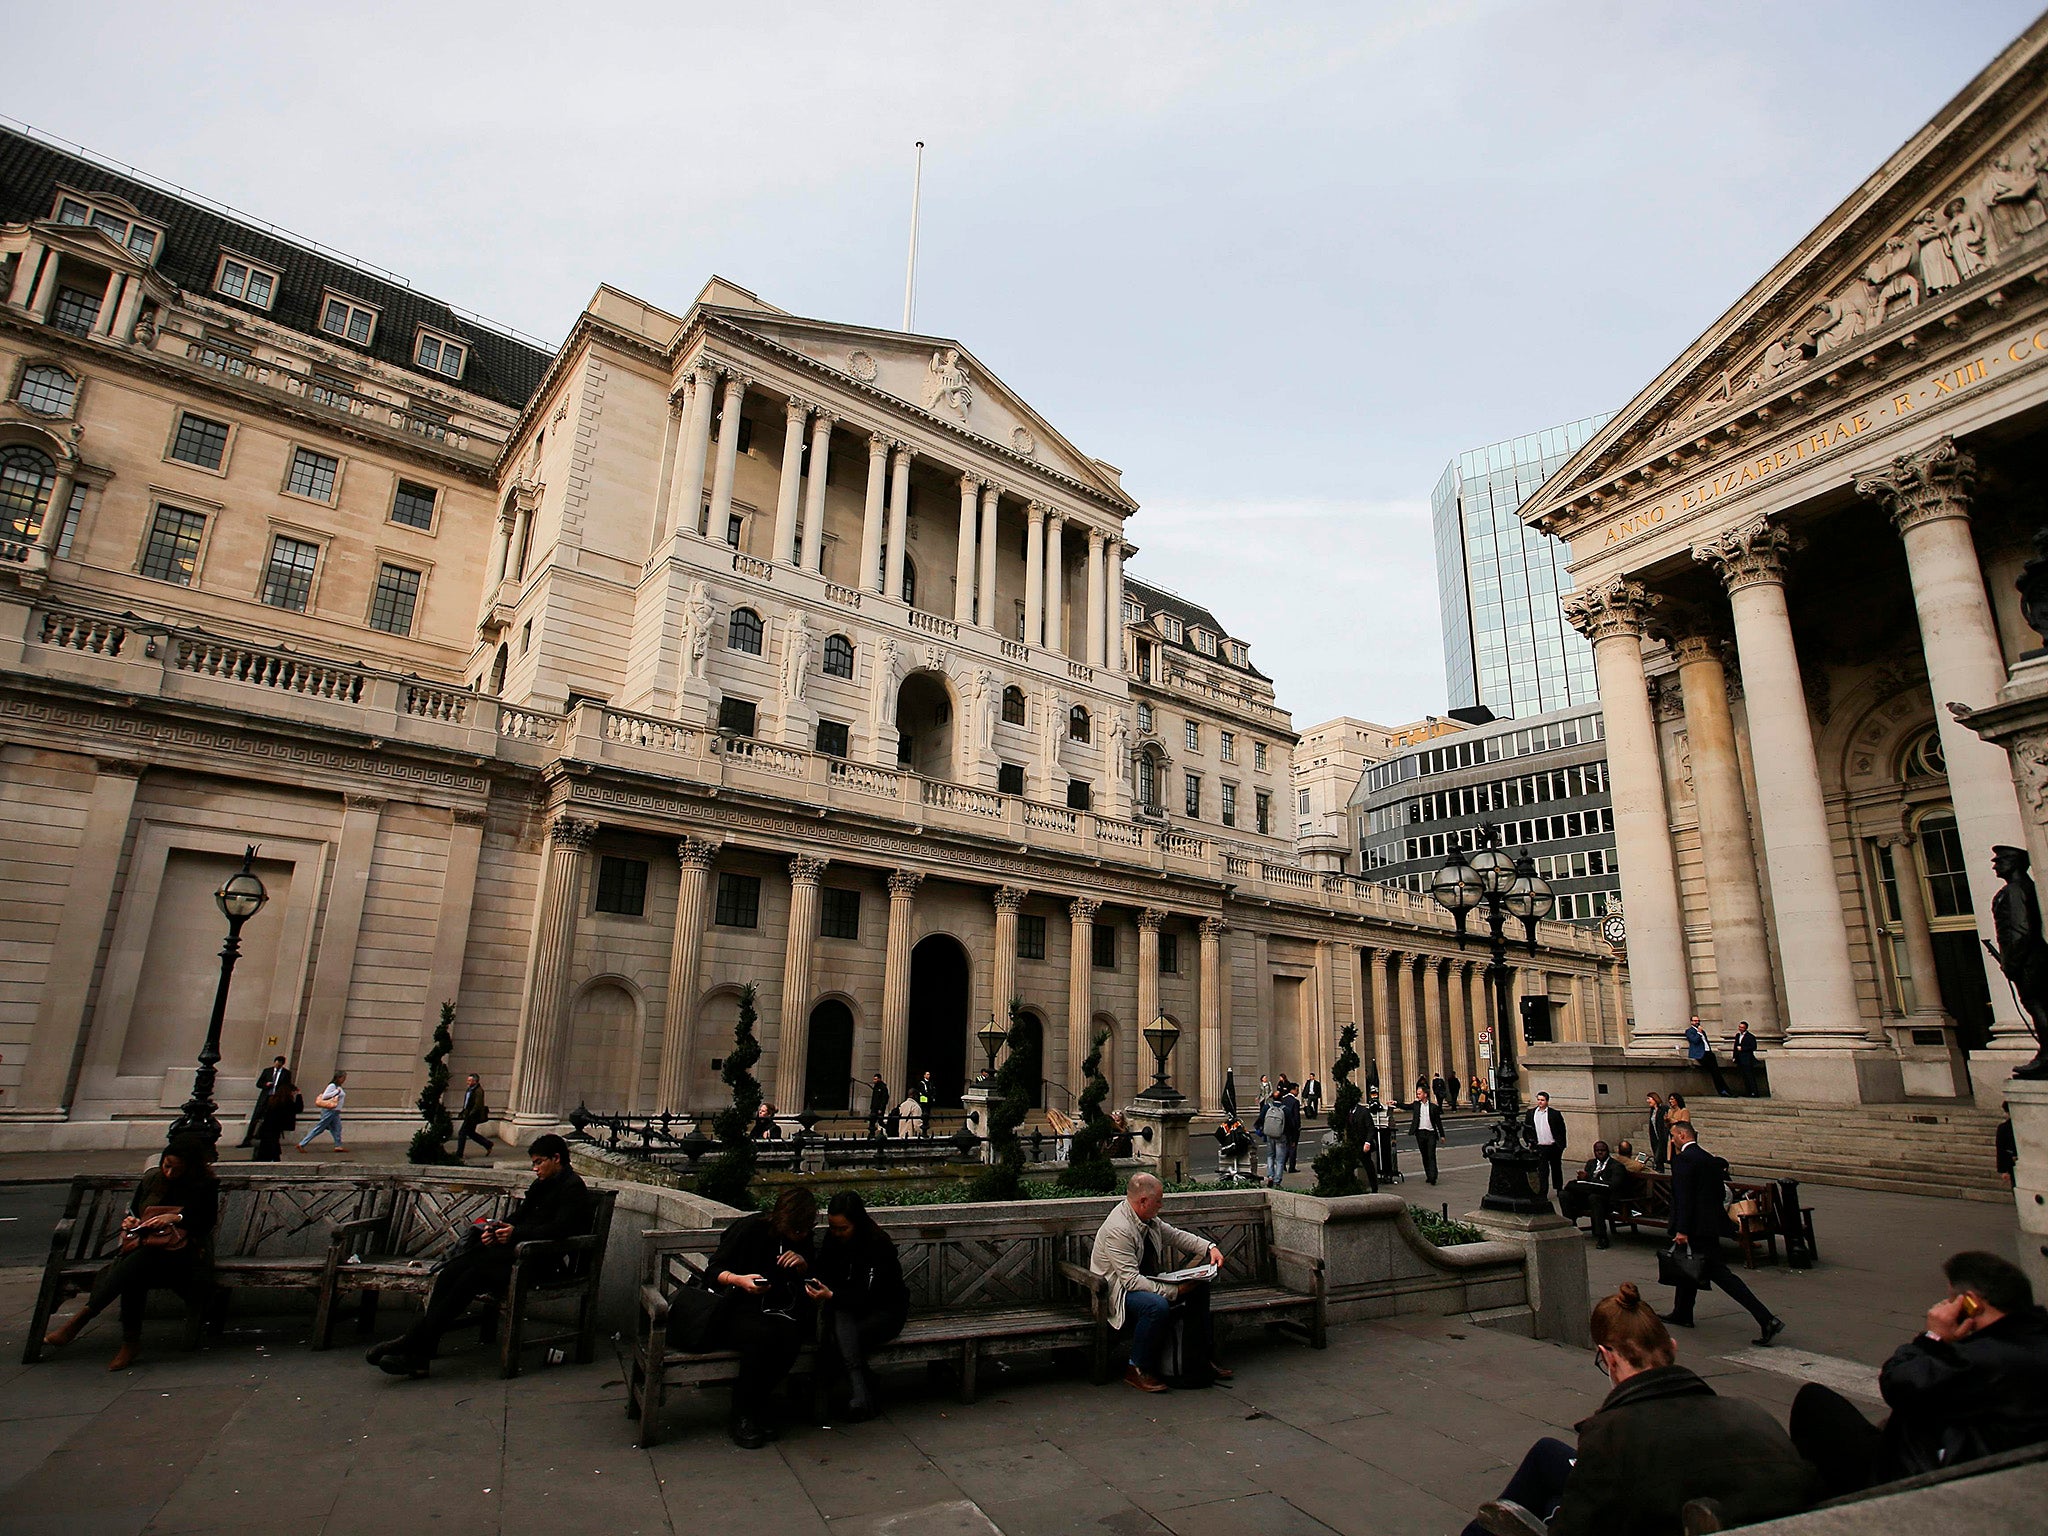 The Bank of England has raised interest rates for the first time in over a decade